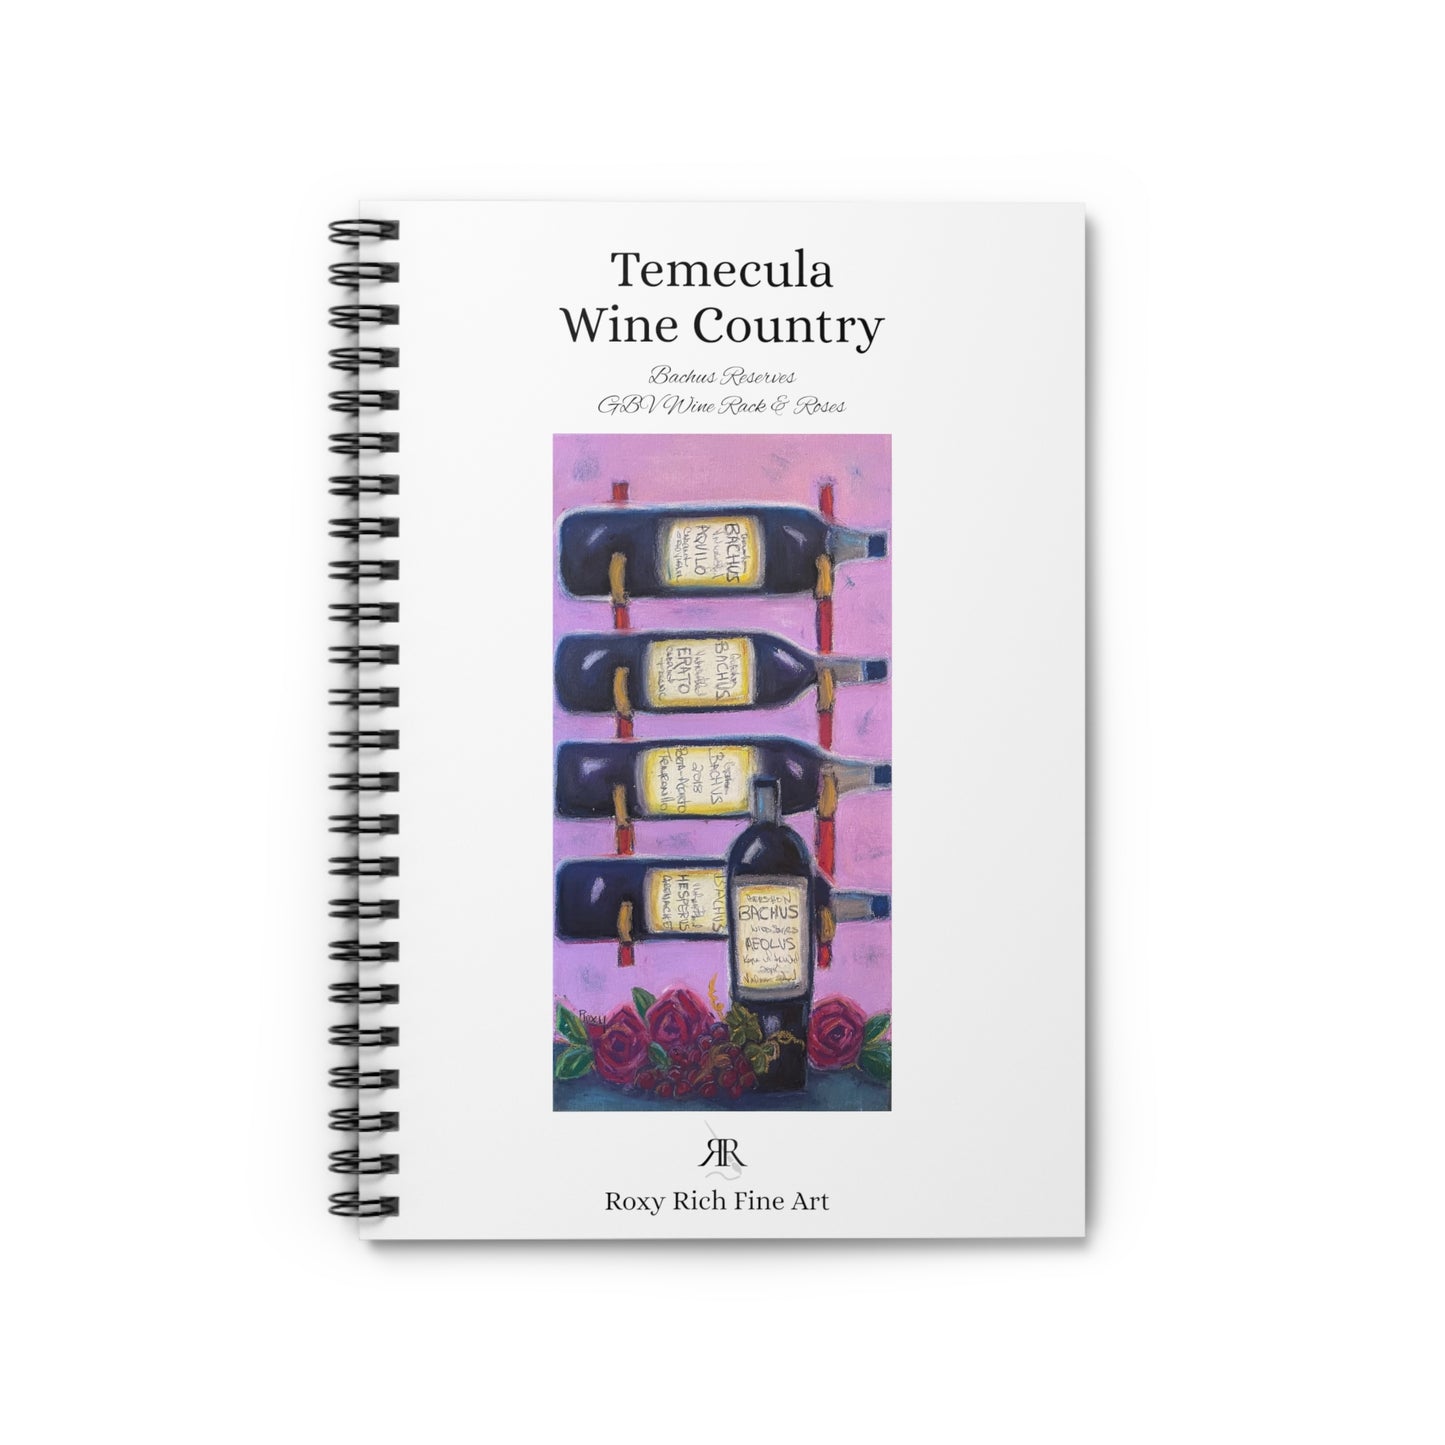 Temecula Wine Country "Bachus Reserves" Spiral Notebook